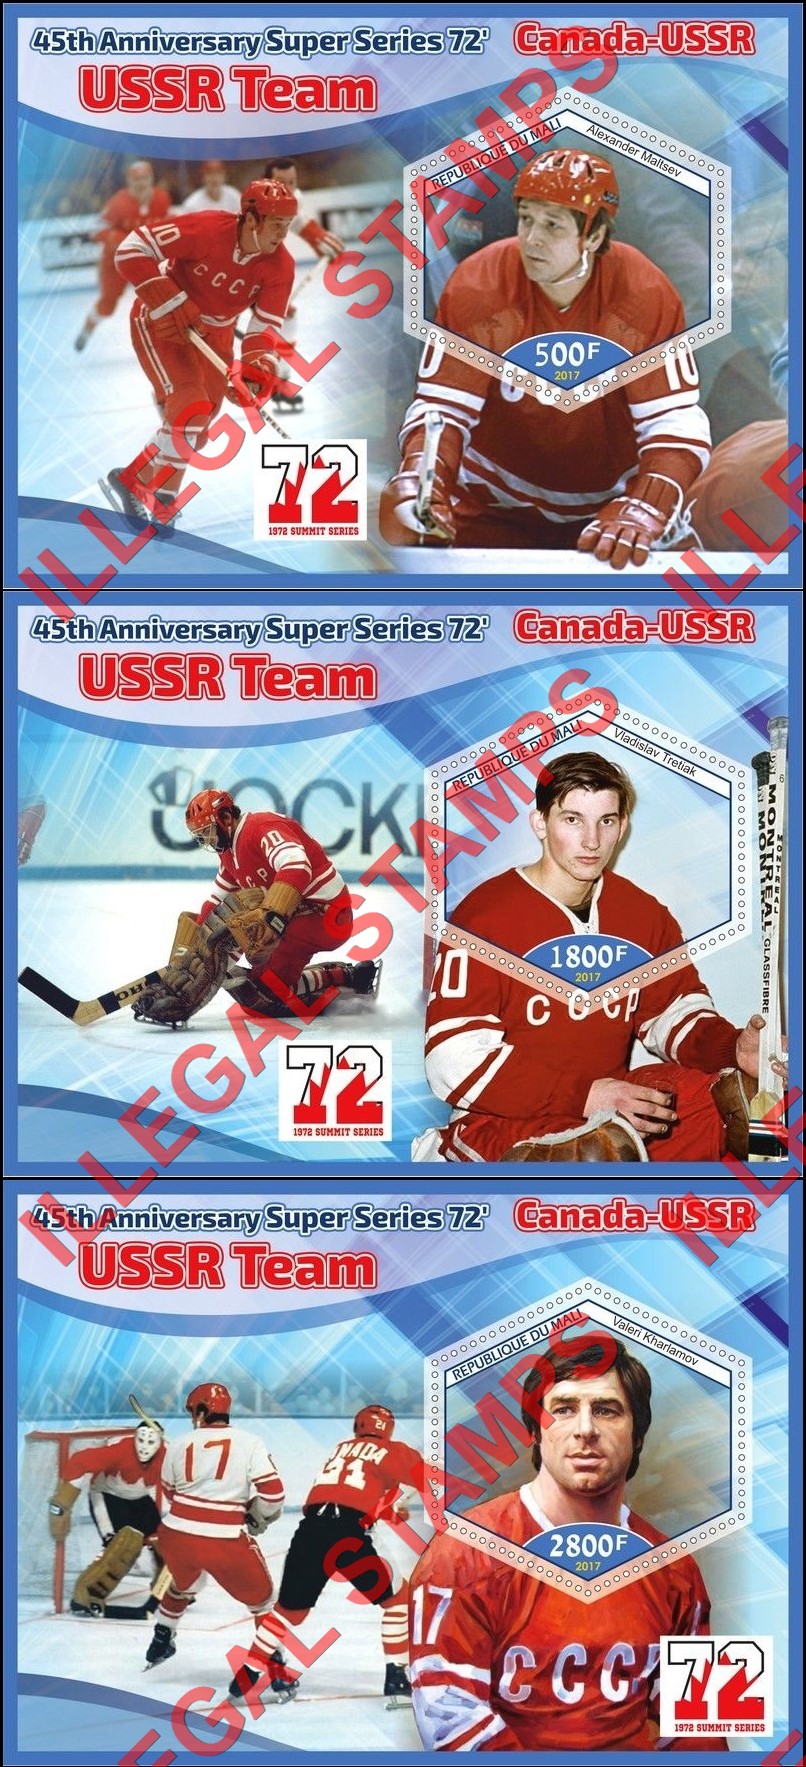 Mali 2017 Ice Hockey USSR Team Illegal Stamp Souvenir Sheets of 1 (Part 2)